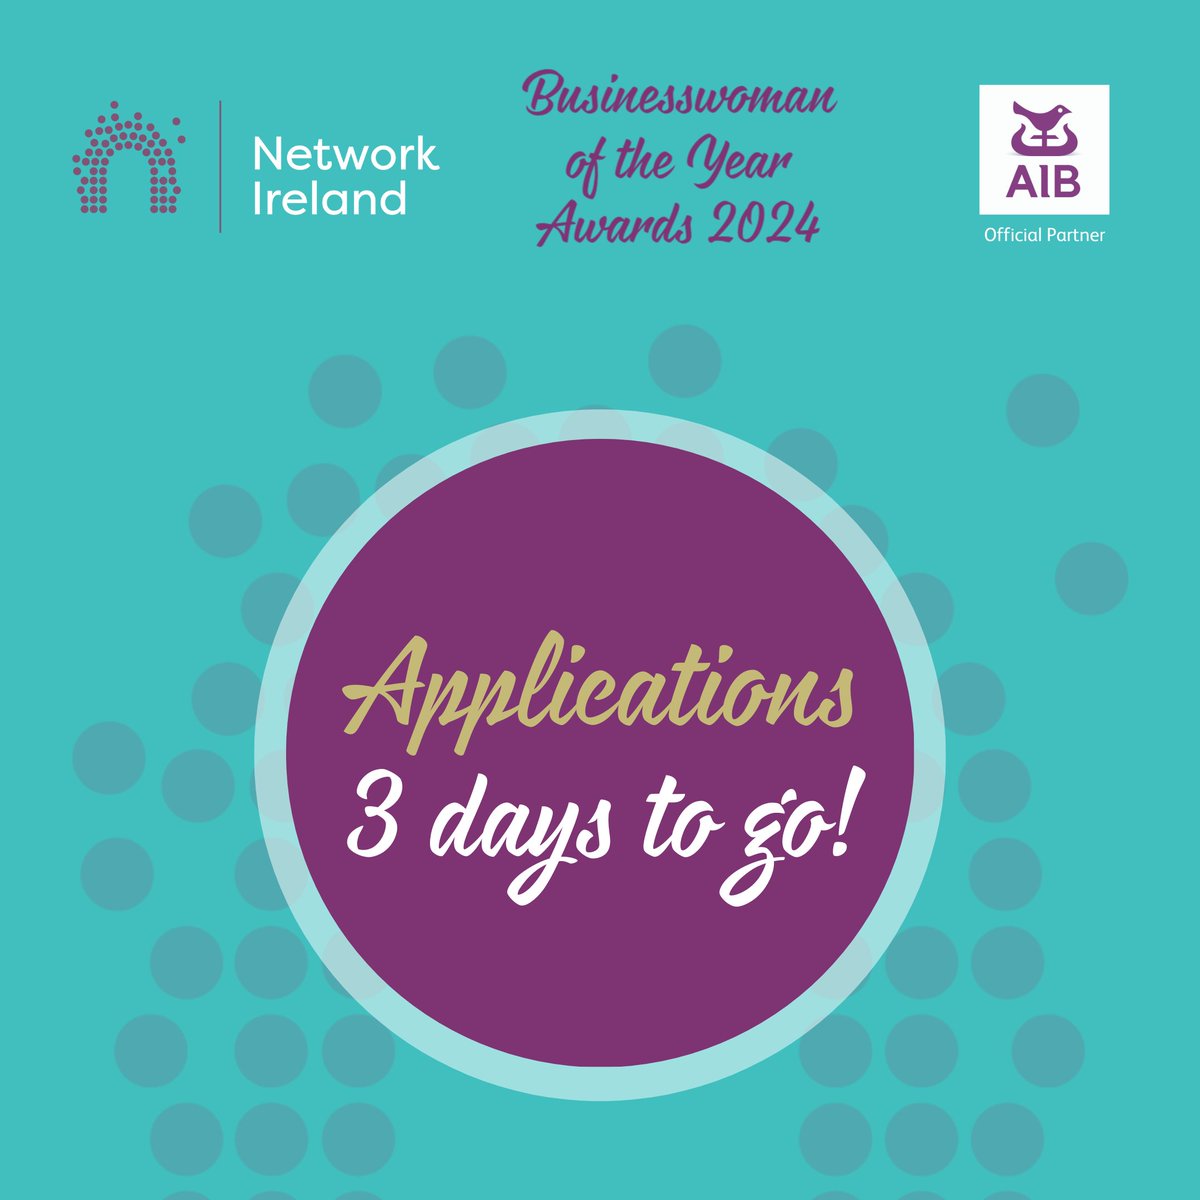 The deadline for applying is Friday. Apply at bit.ly/3v8Ss6Q #supportedbyAIB #NetworkIreland #AStepAhead #NetworkIrelandWaterford #empowerment #businessawards